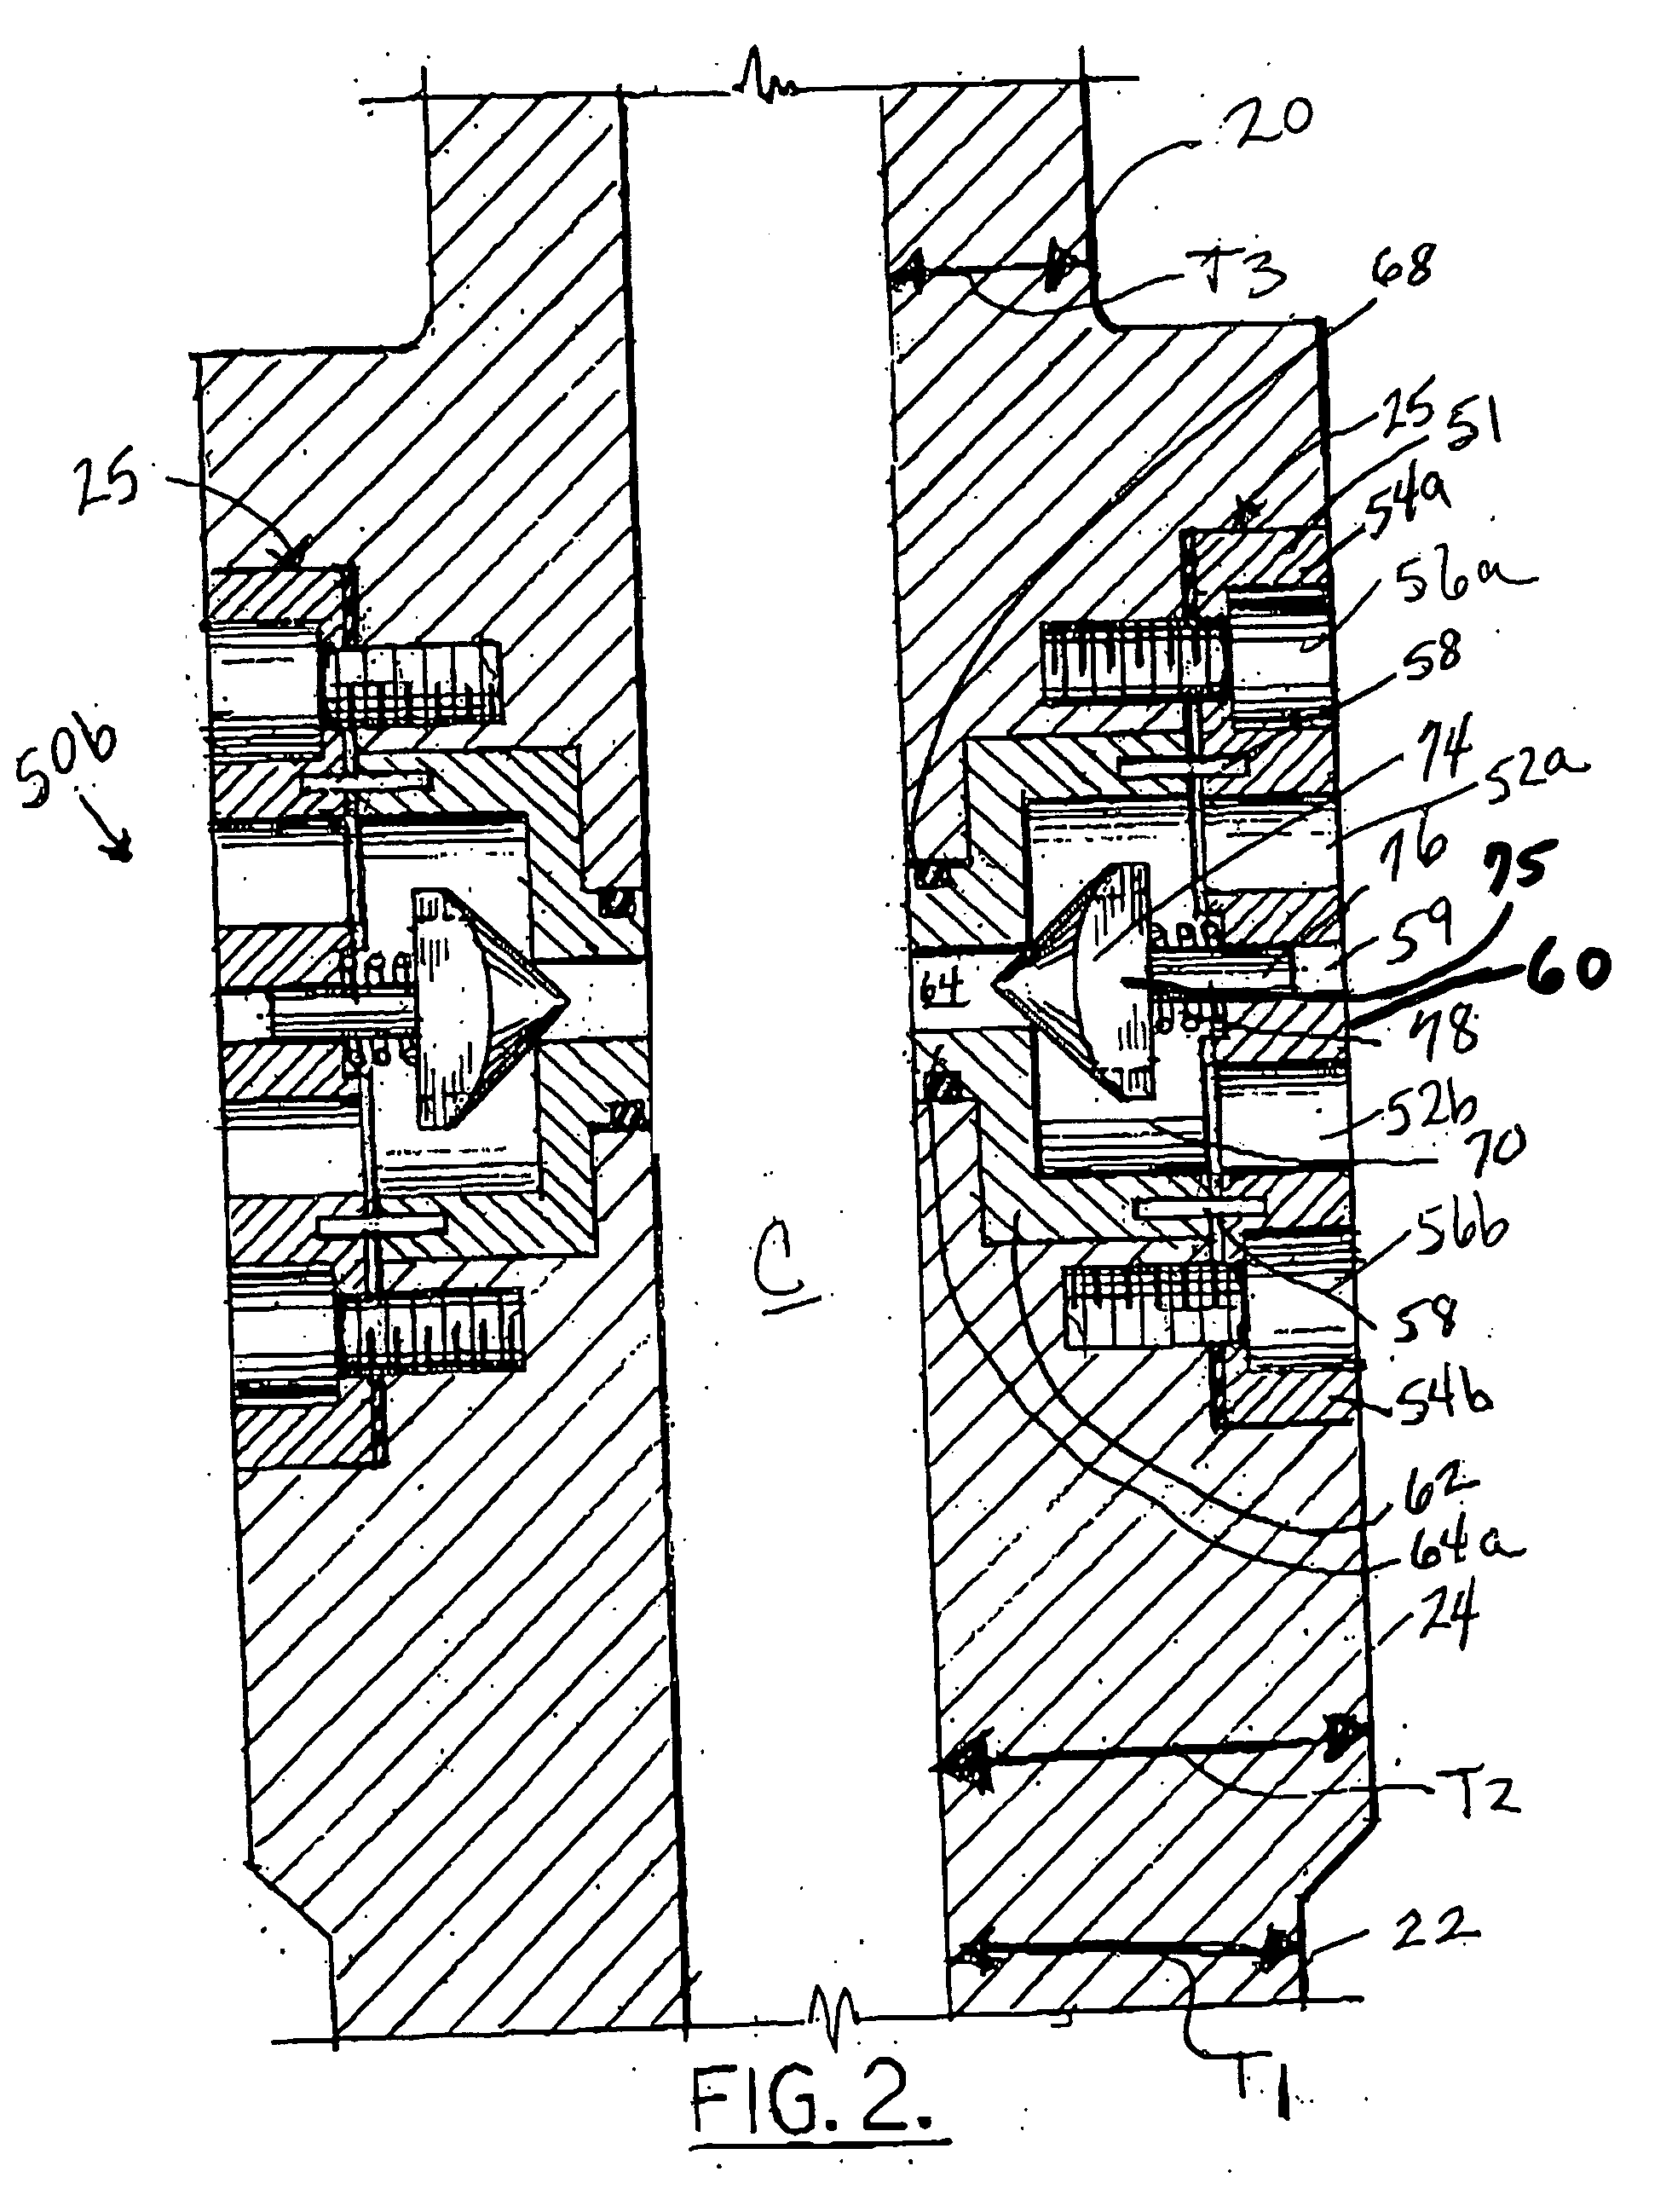 Wellbore cleaning tool system and method of use